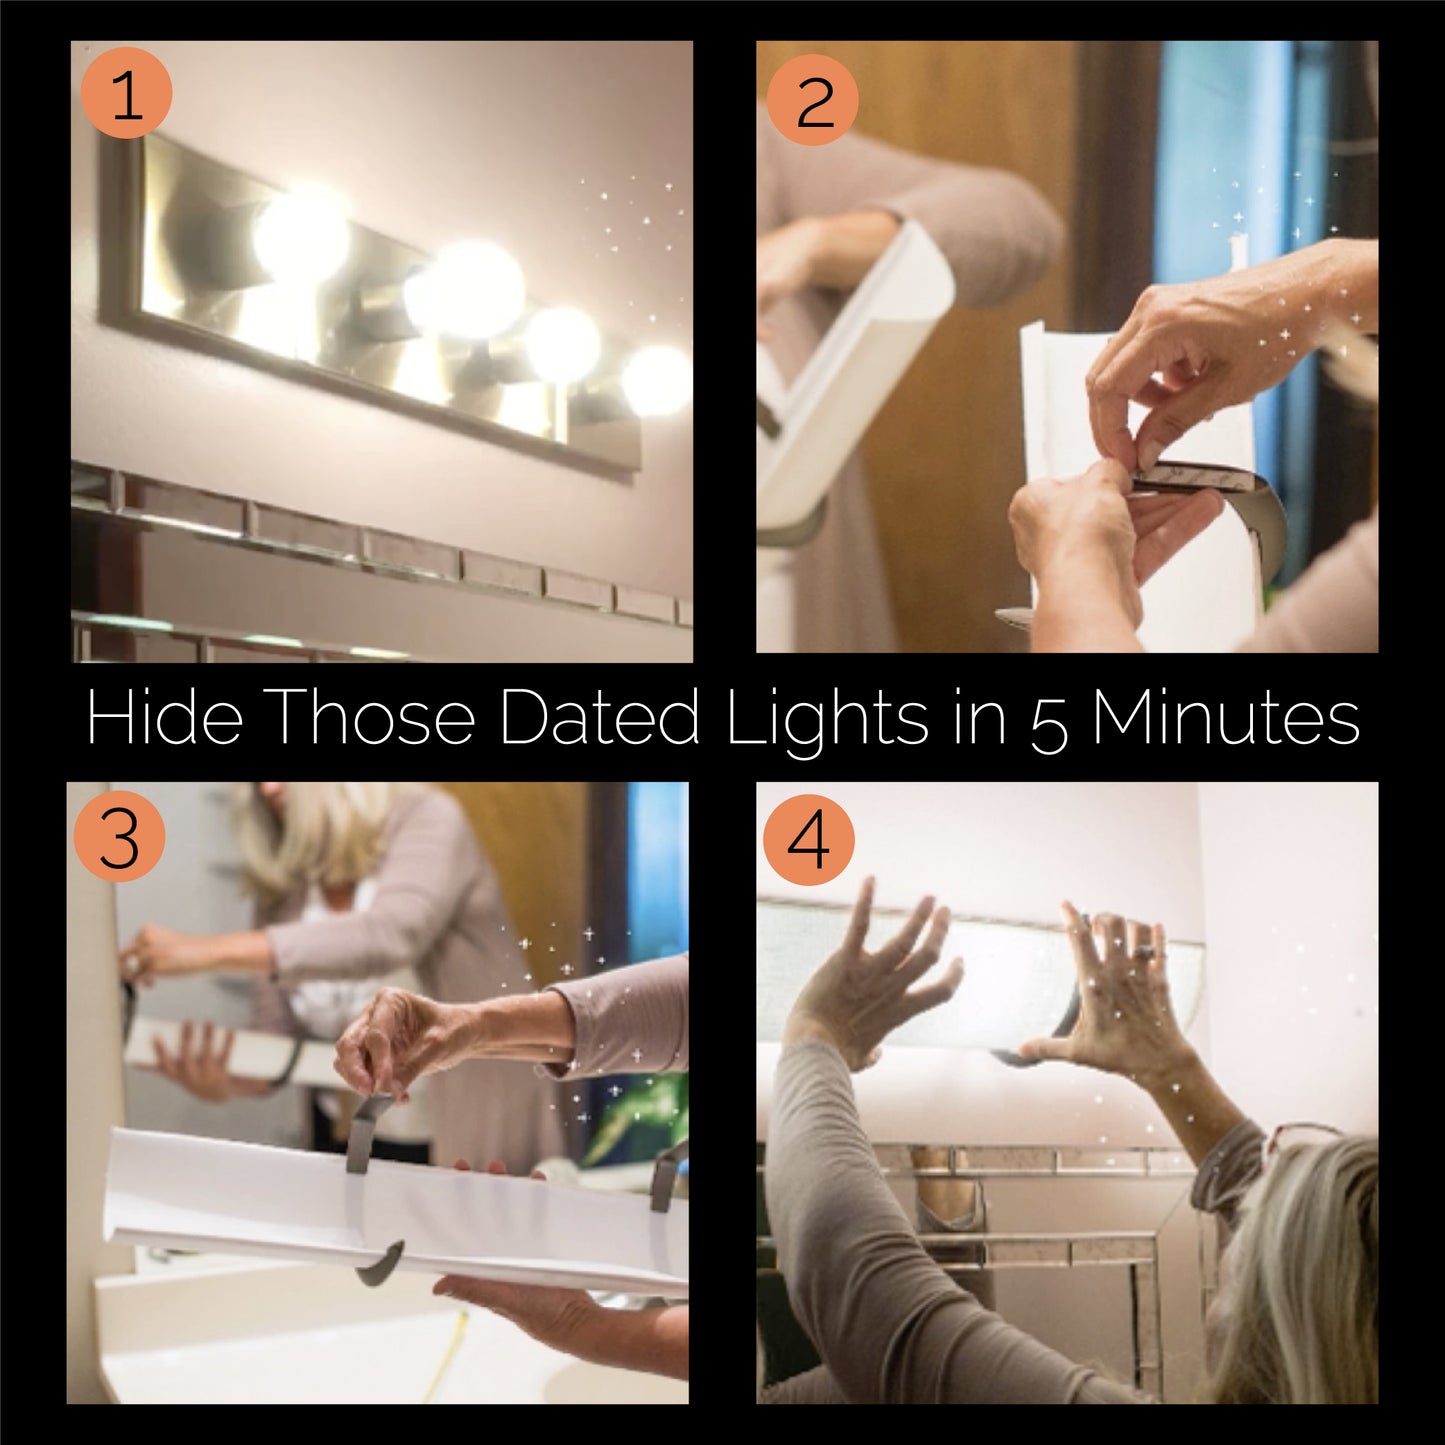  This shows the before and after steps to install an EzLightWrap bath shade over a metal fixture to hide glaring LED bulbs. step one shows the light with mismatched bulbs, step 2 shows removing the adhesive strip on the back of the bracket Step 3 shows adjusting the bracket and step 4 shows installing the light over the strip light